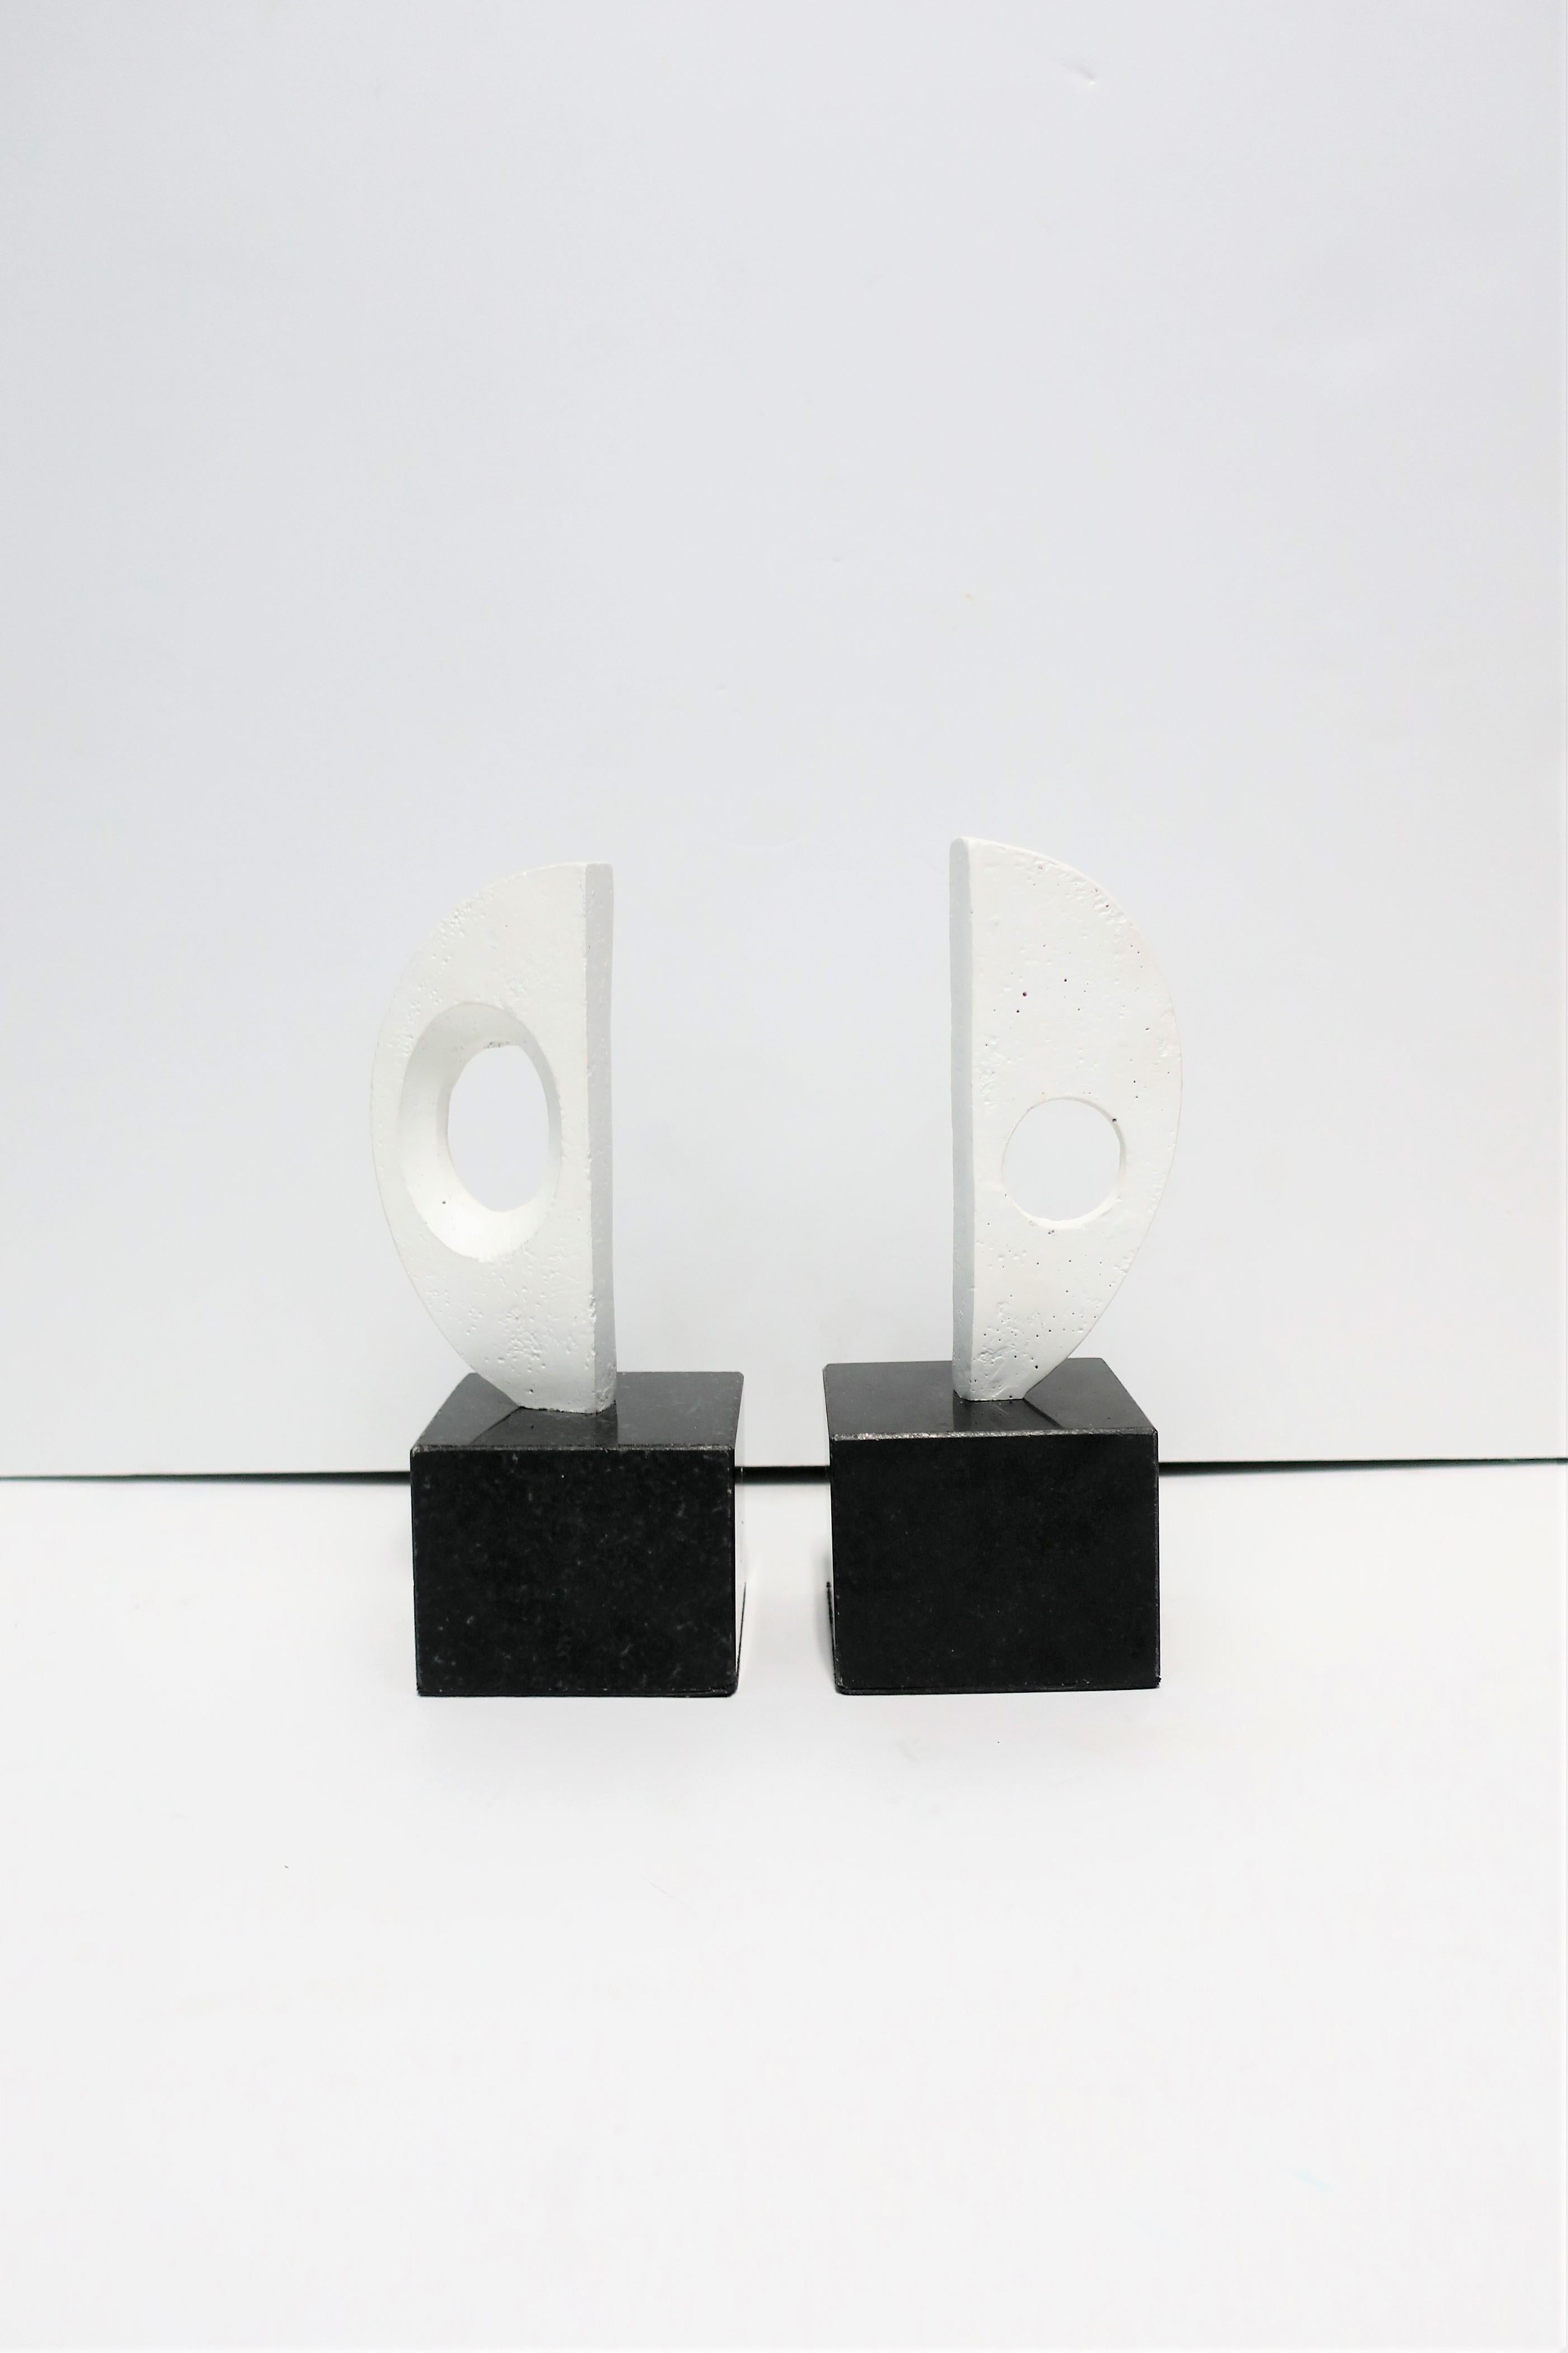 A substantial pair of black and white abstract white plaster sculpture bookends on black marble or granite bases. Pair demonstrated as bookends in image #5. Pair also works well as decorative objects/sculptures as show in images #6 and 7 on small